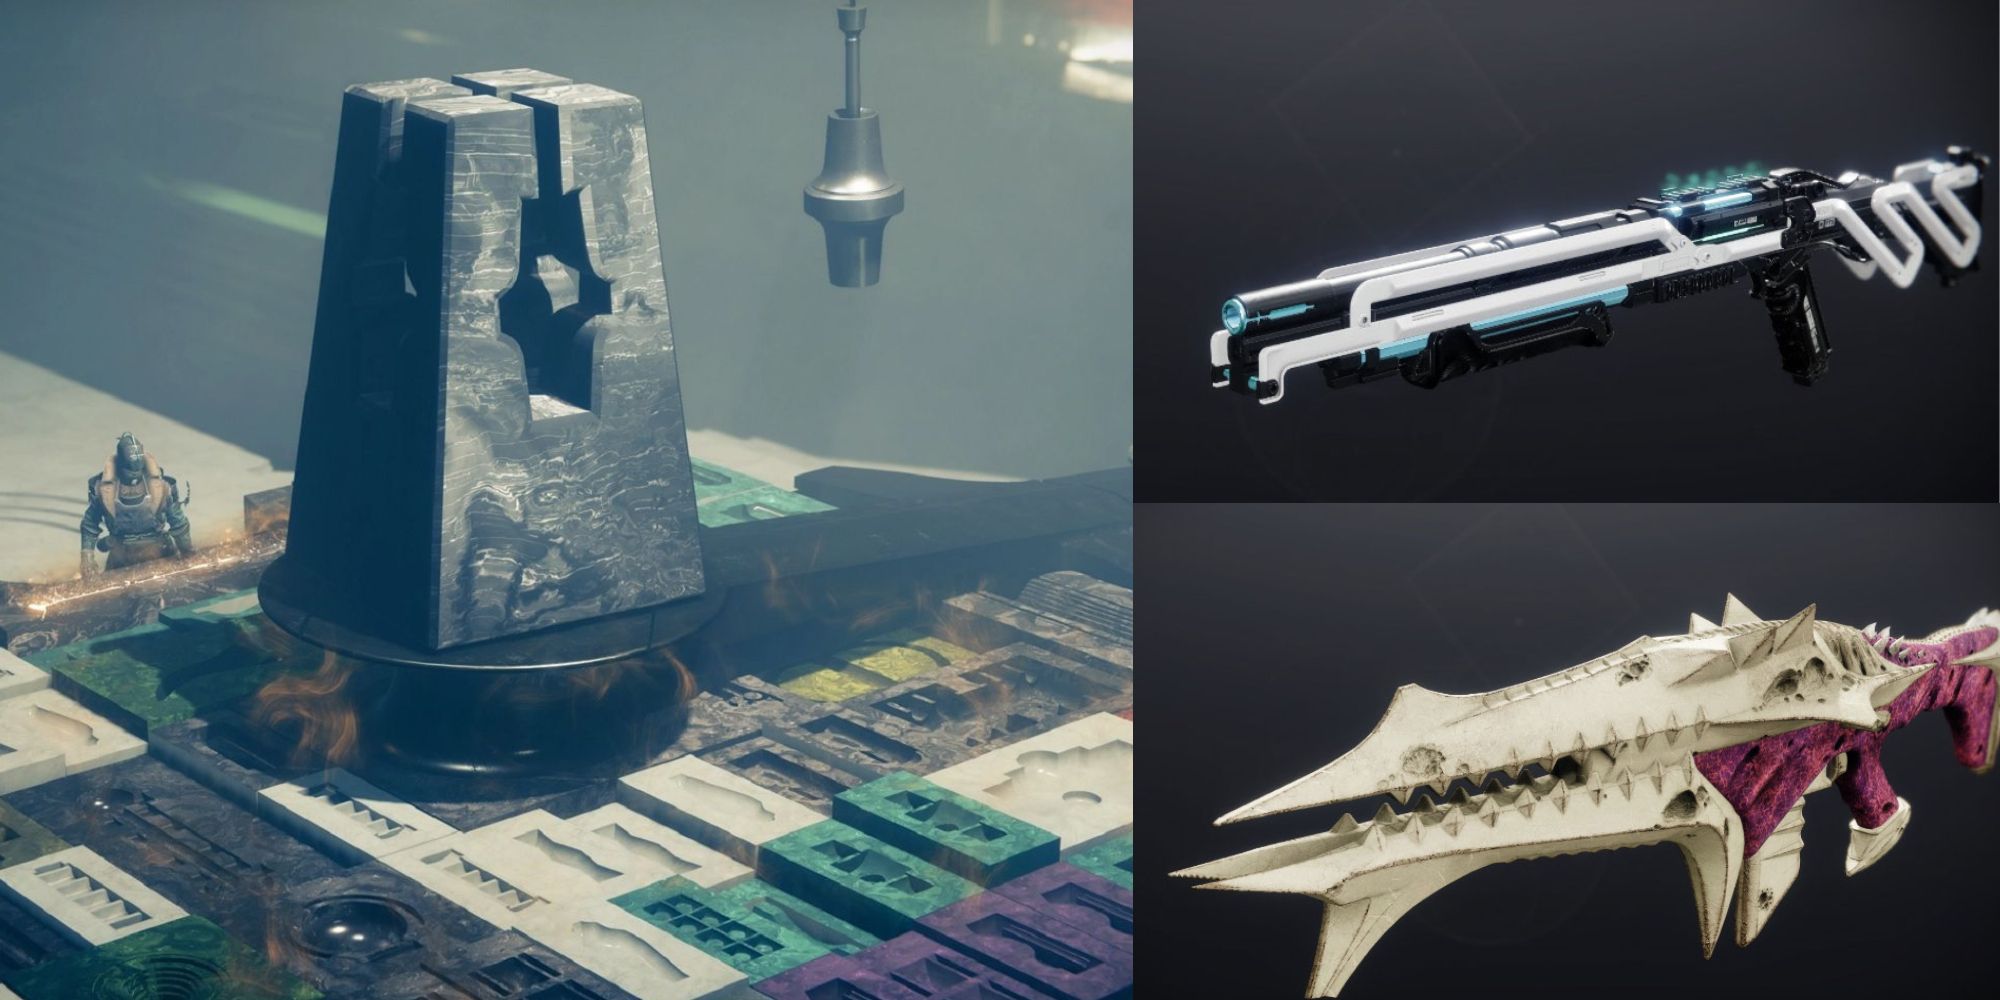 Destiny 2 crafting table, Heritage shotgun, and Smite of Merain Pulse Rifle